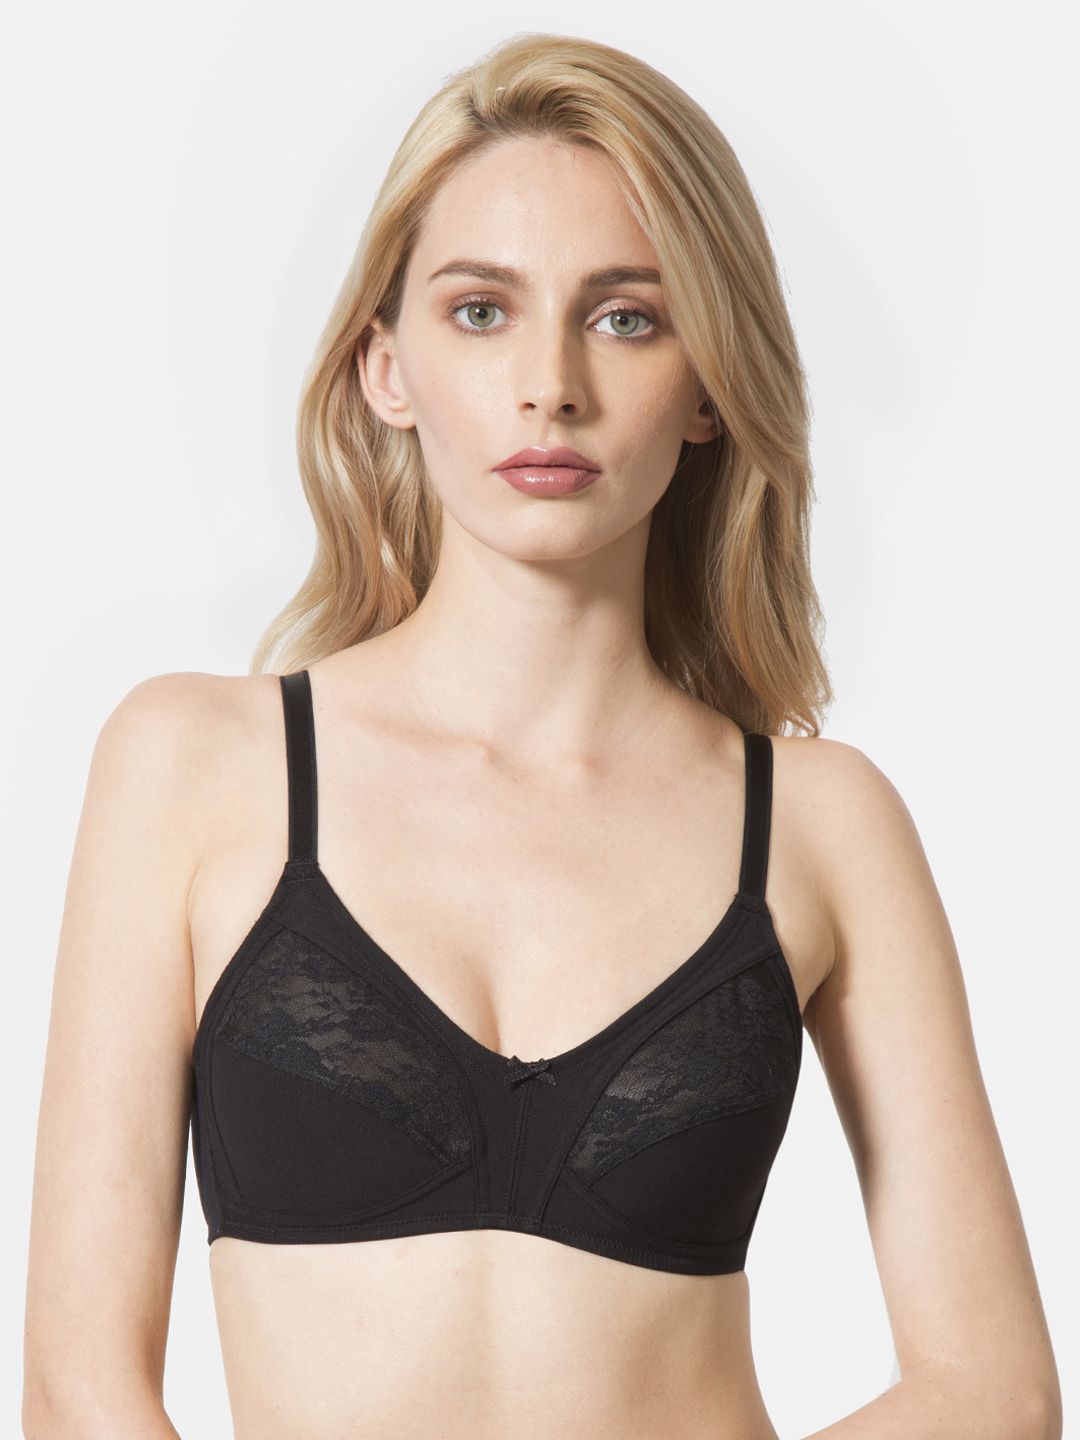 Van Heusen Black Lace Non-Wired Non Padded Magic Lift Full Support Everyday  Bra ILIBR1ACSSXD11008 Price in India, Full Specifications & Offers